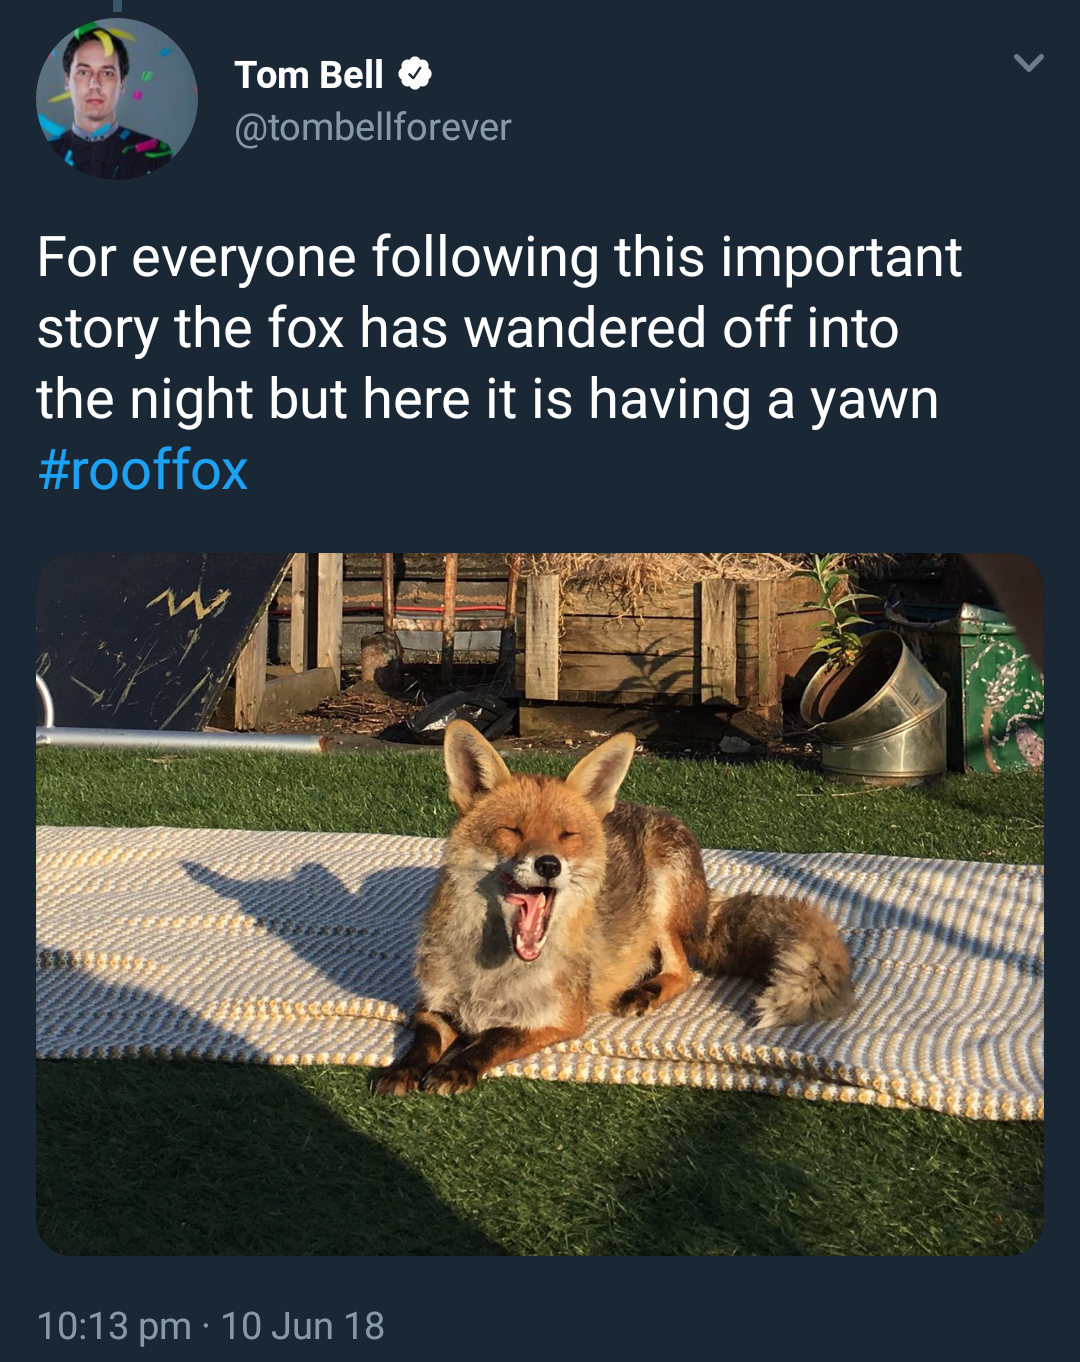 Feel Good Post About A Wild Fox Sunbathing On Someones Roof